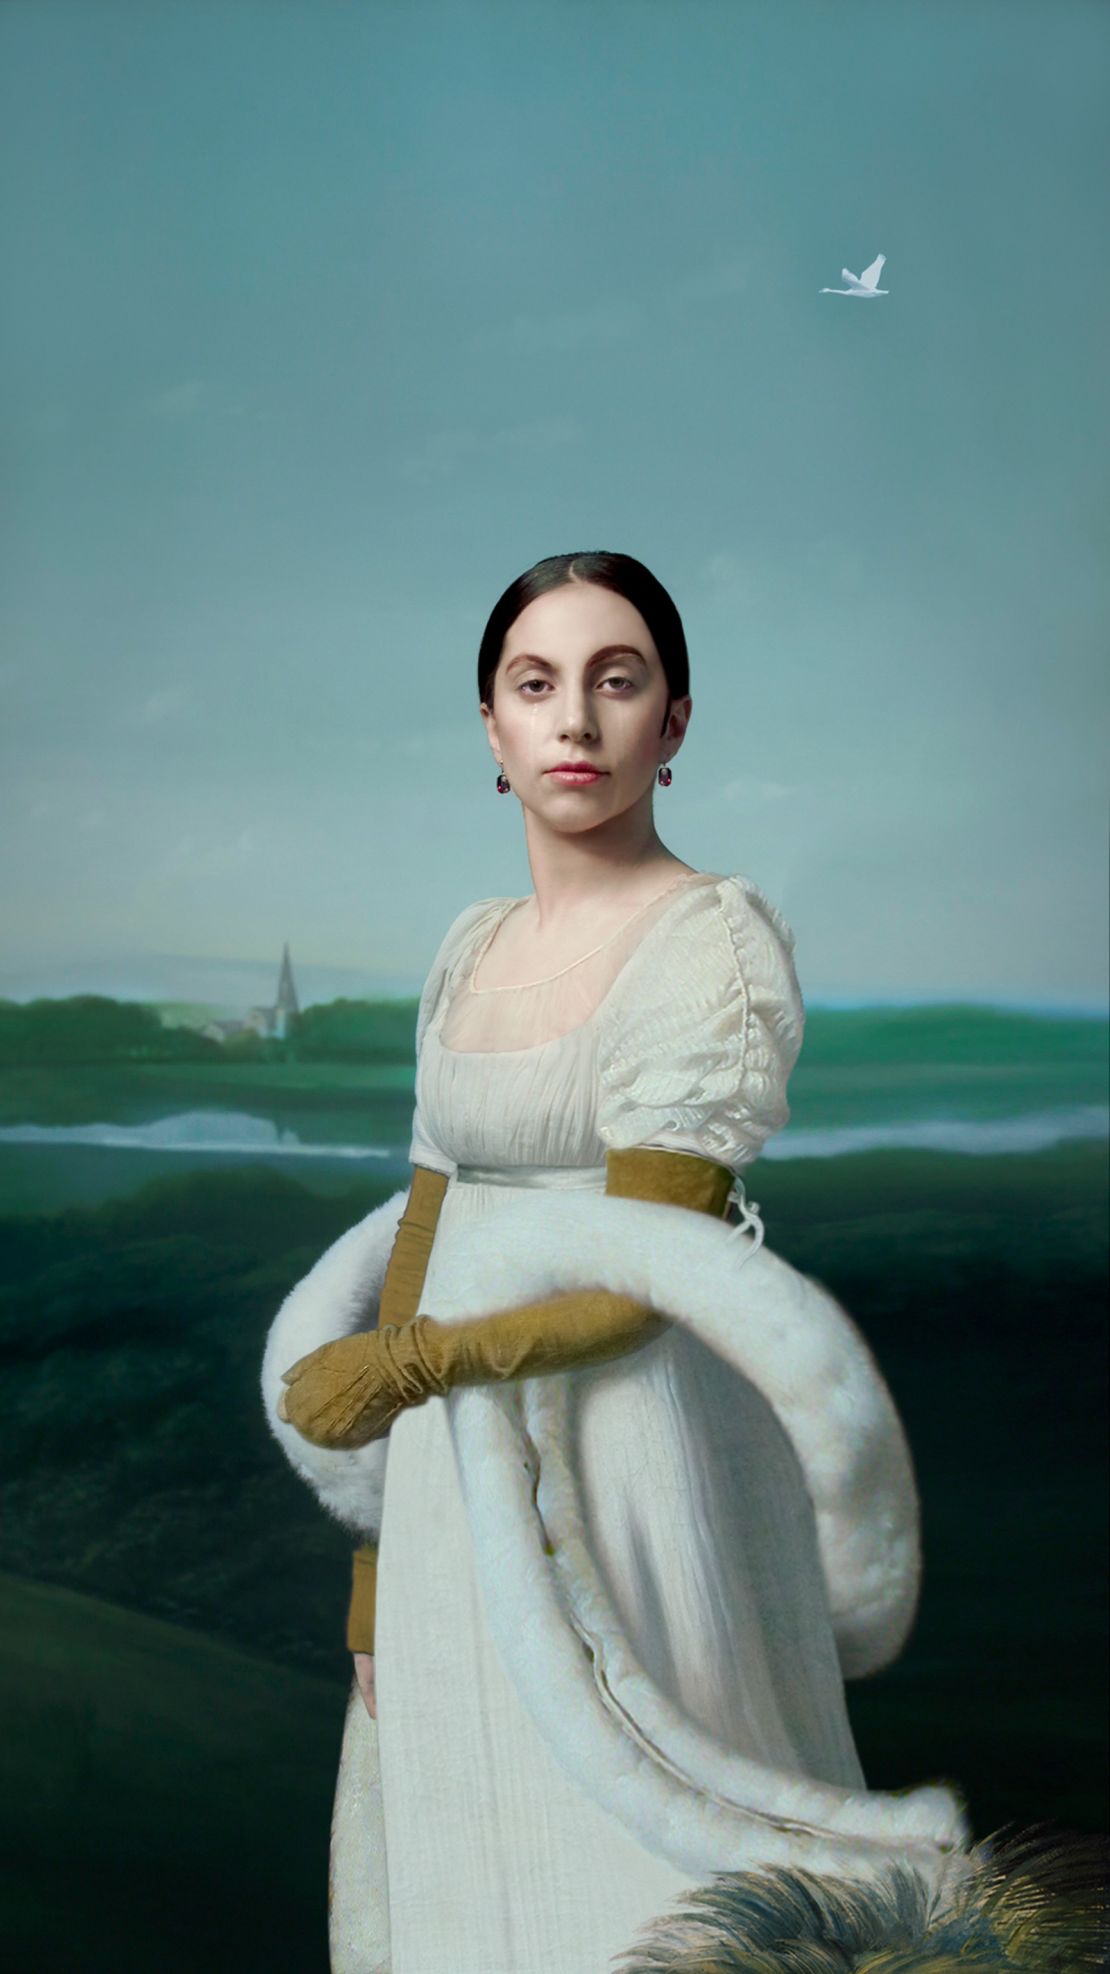 This portrait of Lady Gaga premiered at the Louvre Museum in Paris in 2013.